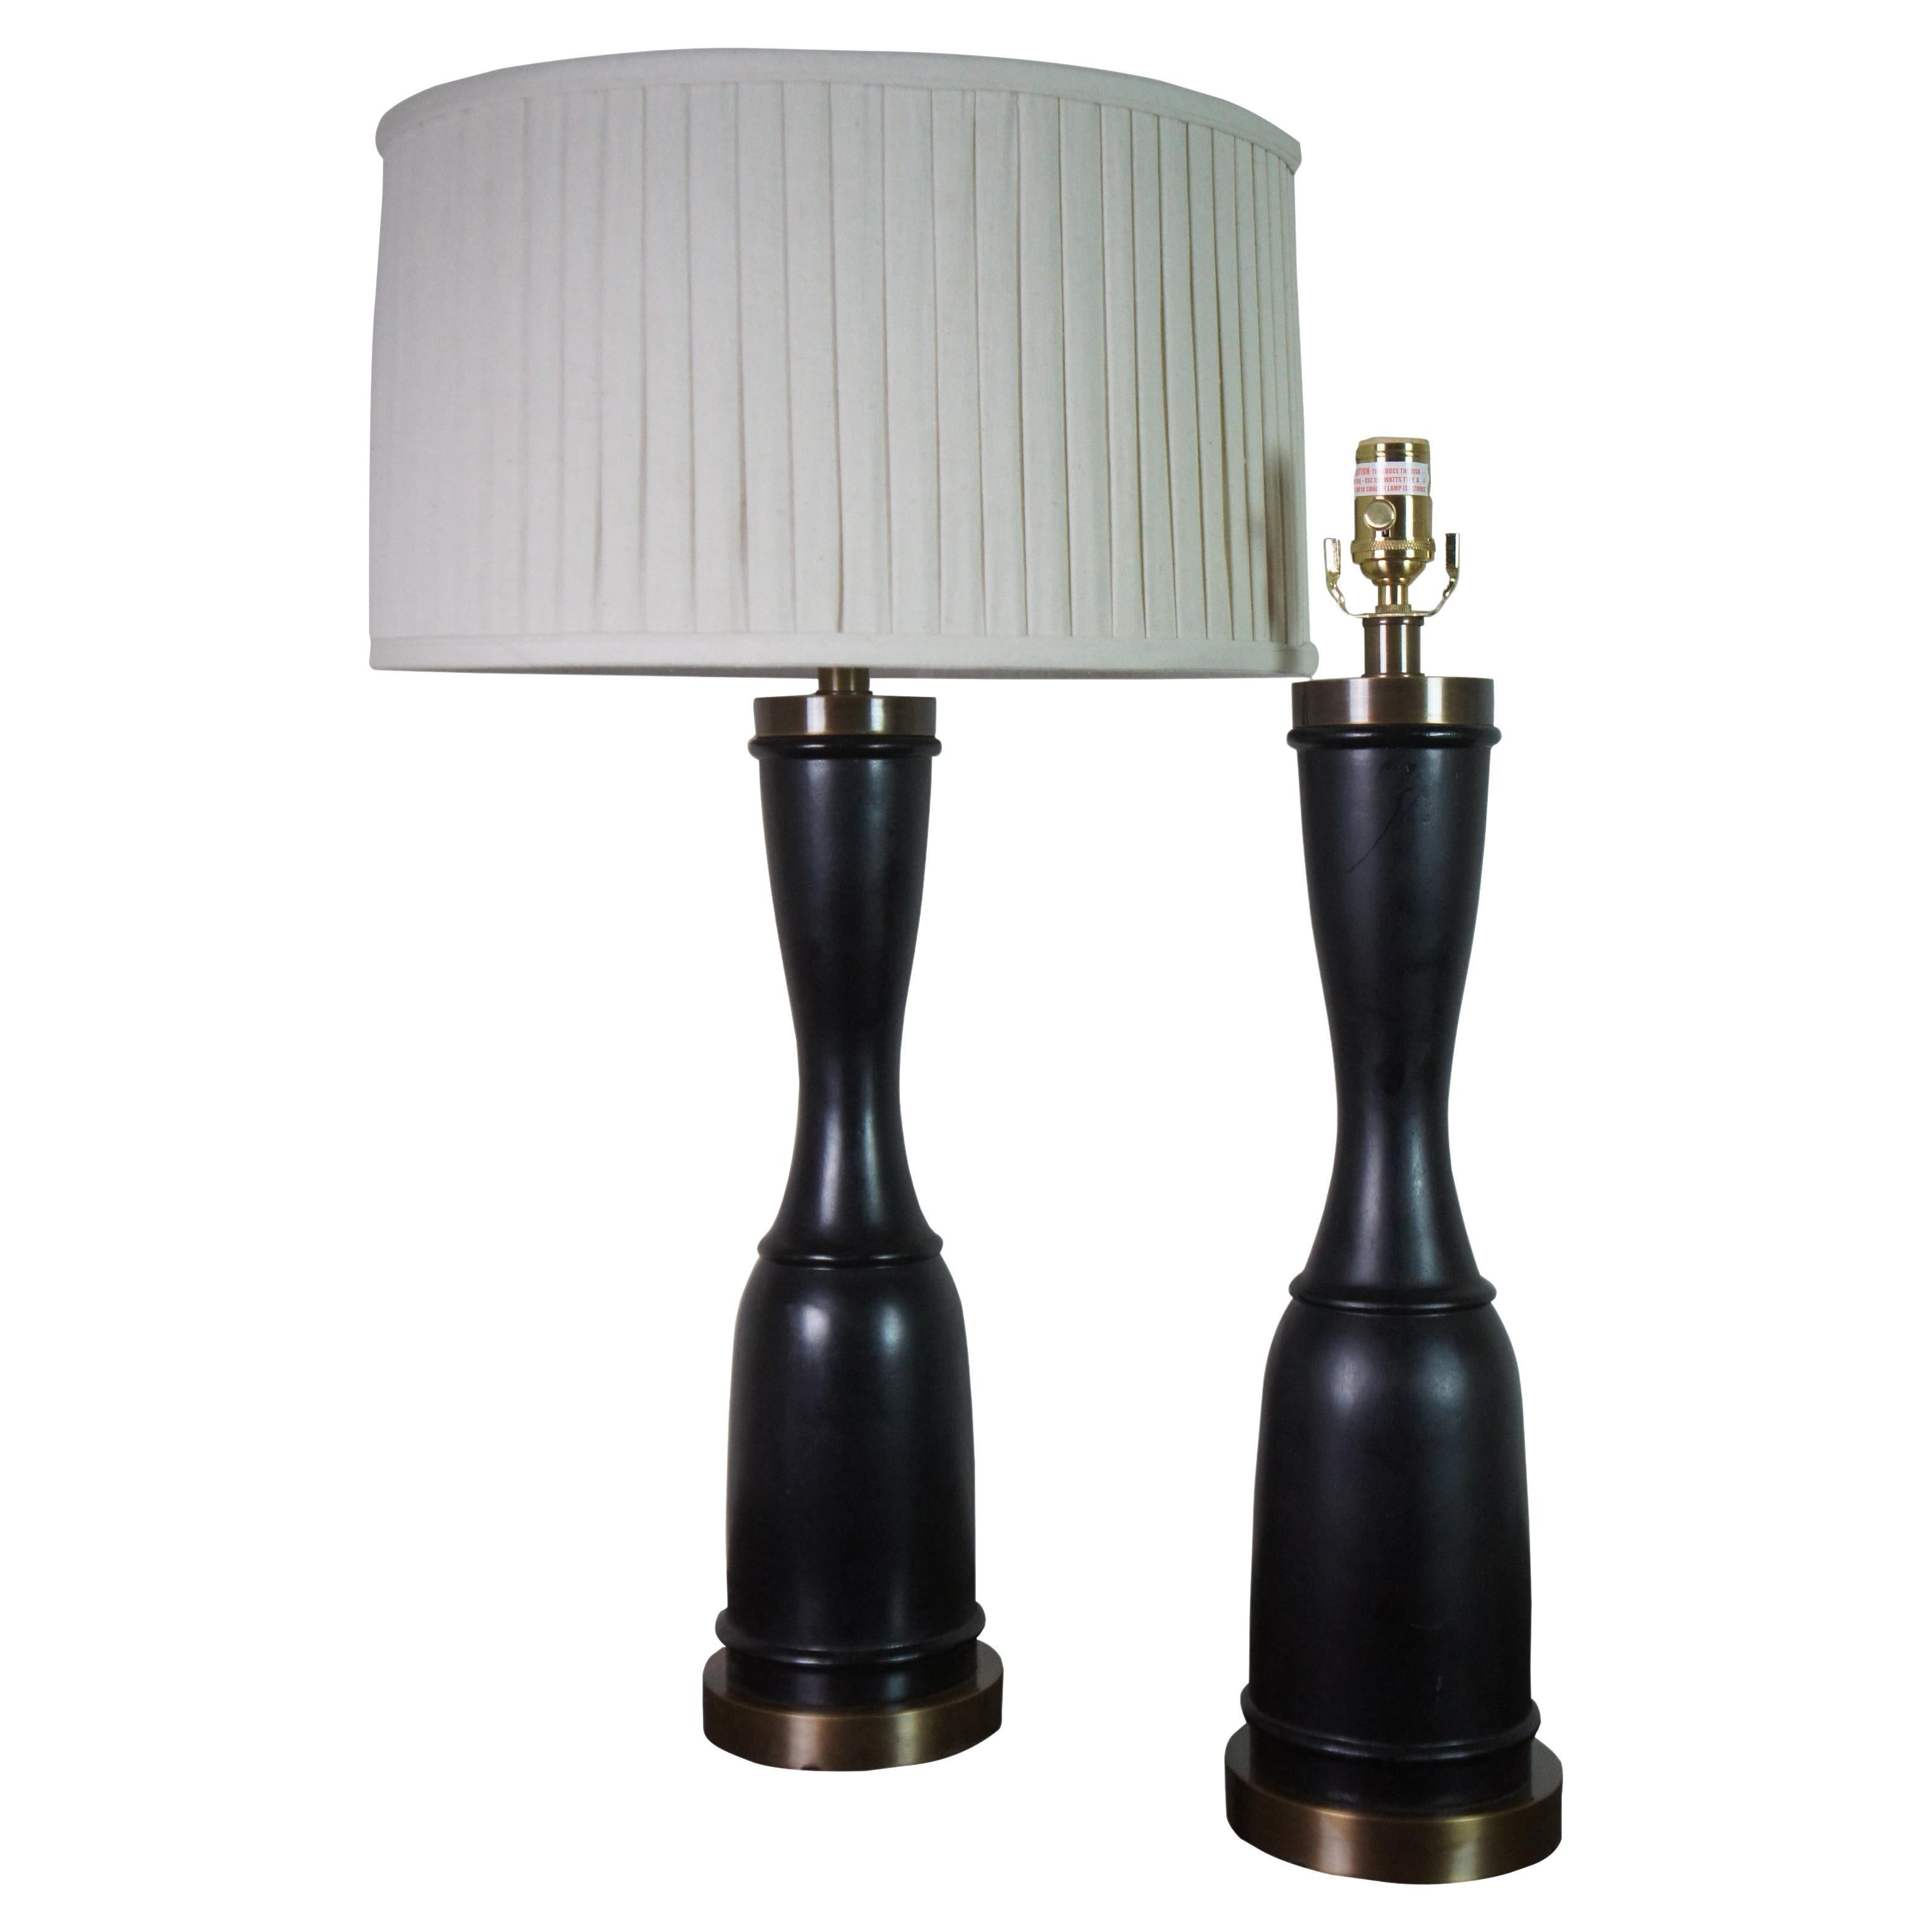 Two vintage designer table lamps featuring a turned trophy form with ebonized wood and brushed brass accents. Attributed to Baker Furniture.

Measures: 6” x 24.5” / Shade - 18.5” x 10” / Height to Top of Finial – 32” (Diameter x Height).